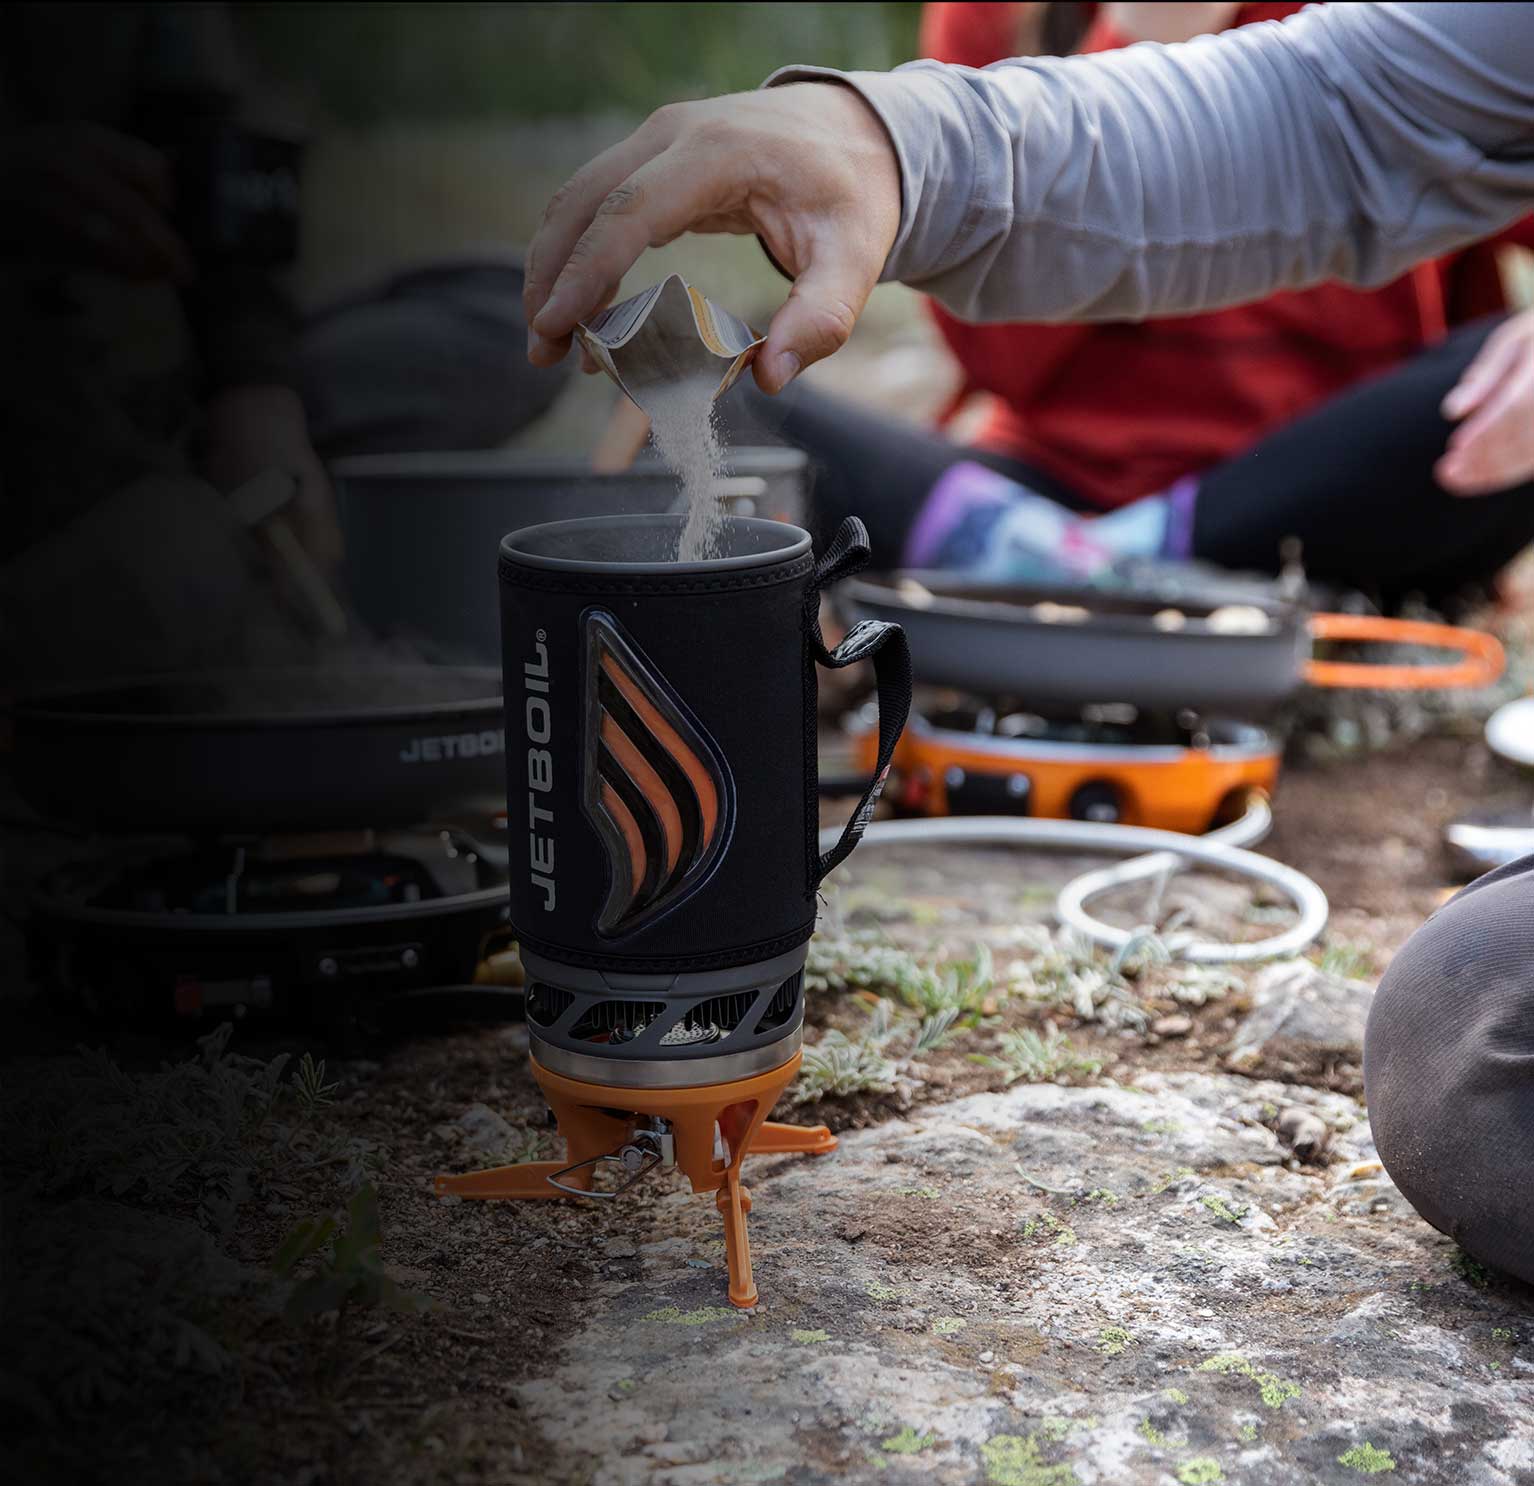 Stove Selector Home | Jetboil